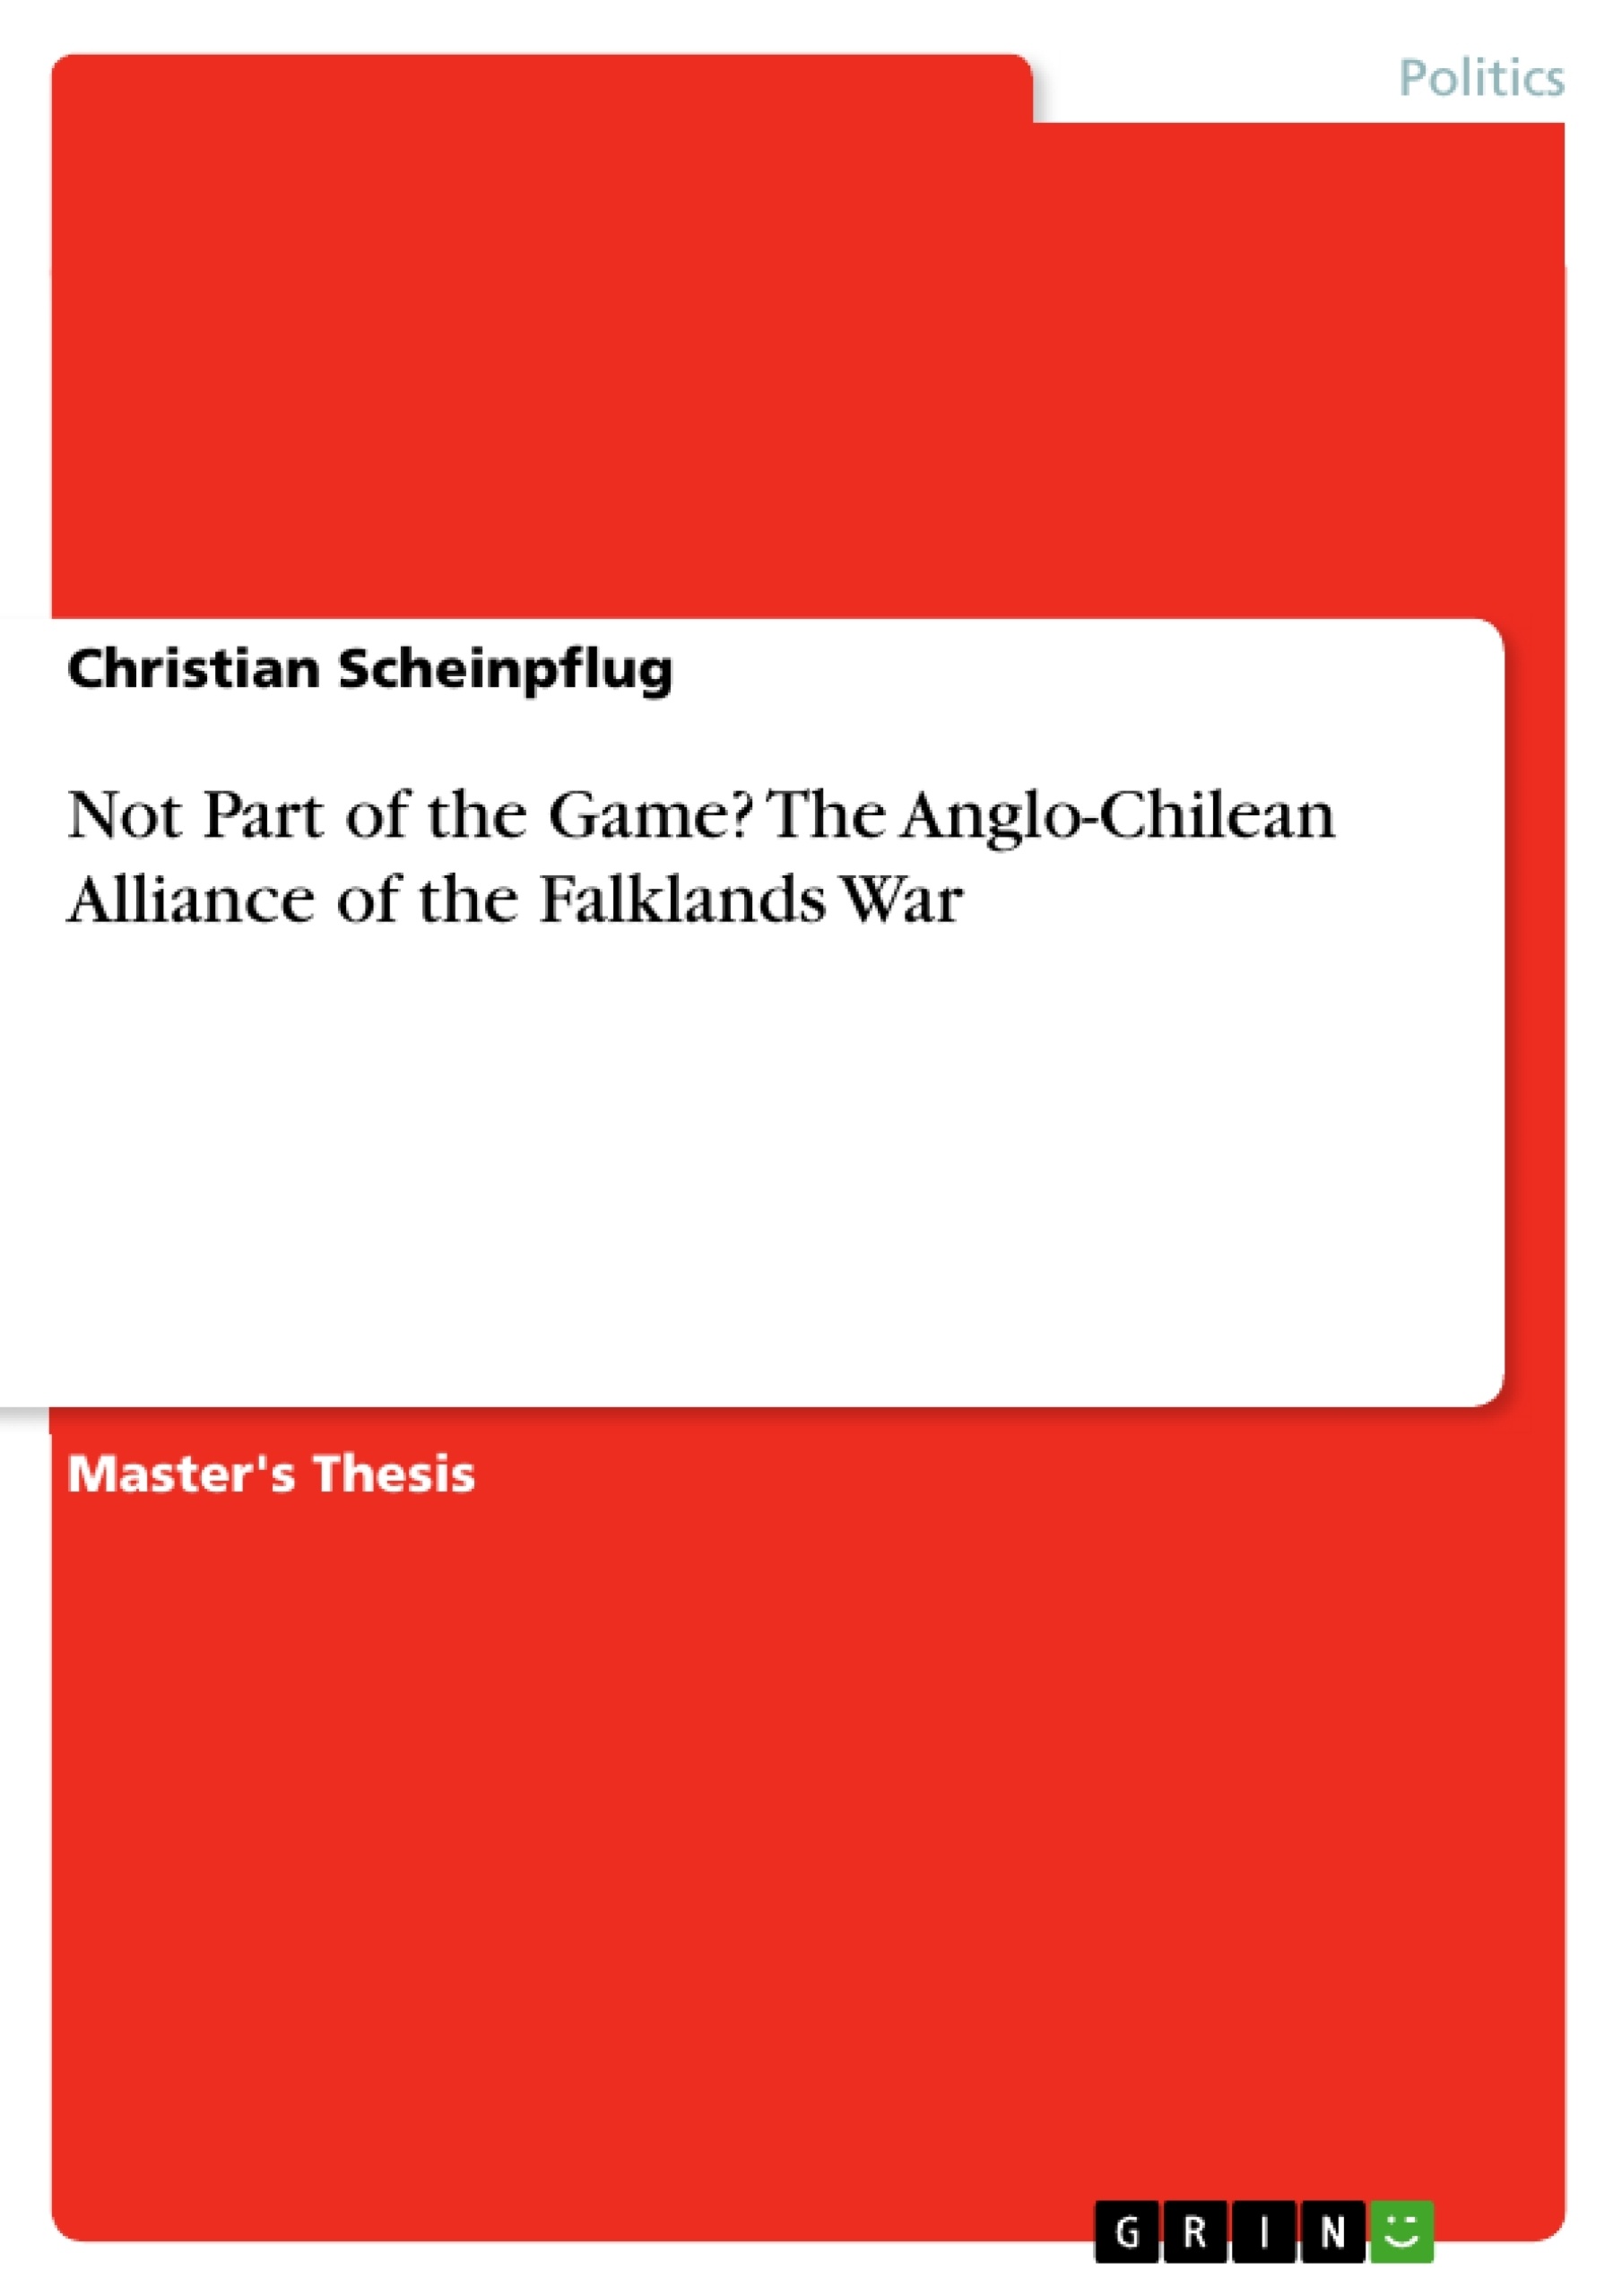 Title: Not Part of the Game? The Anglo-Chilean Alliance of the Falklands War